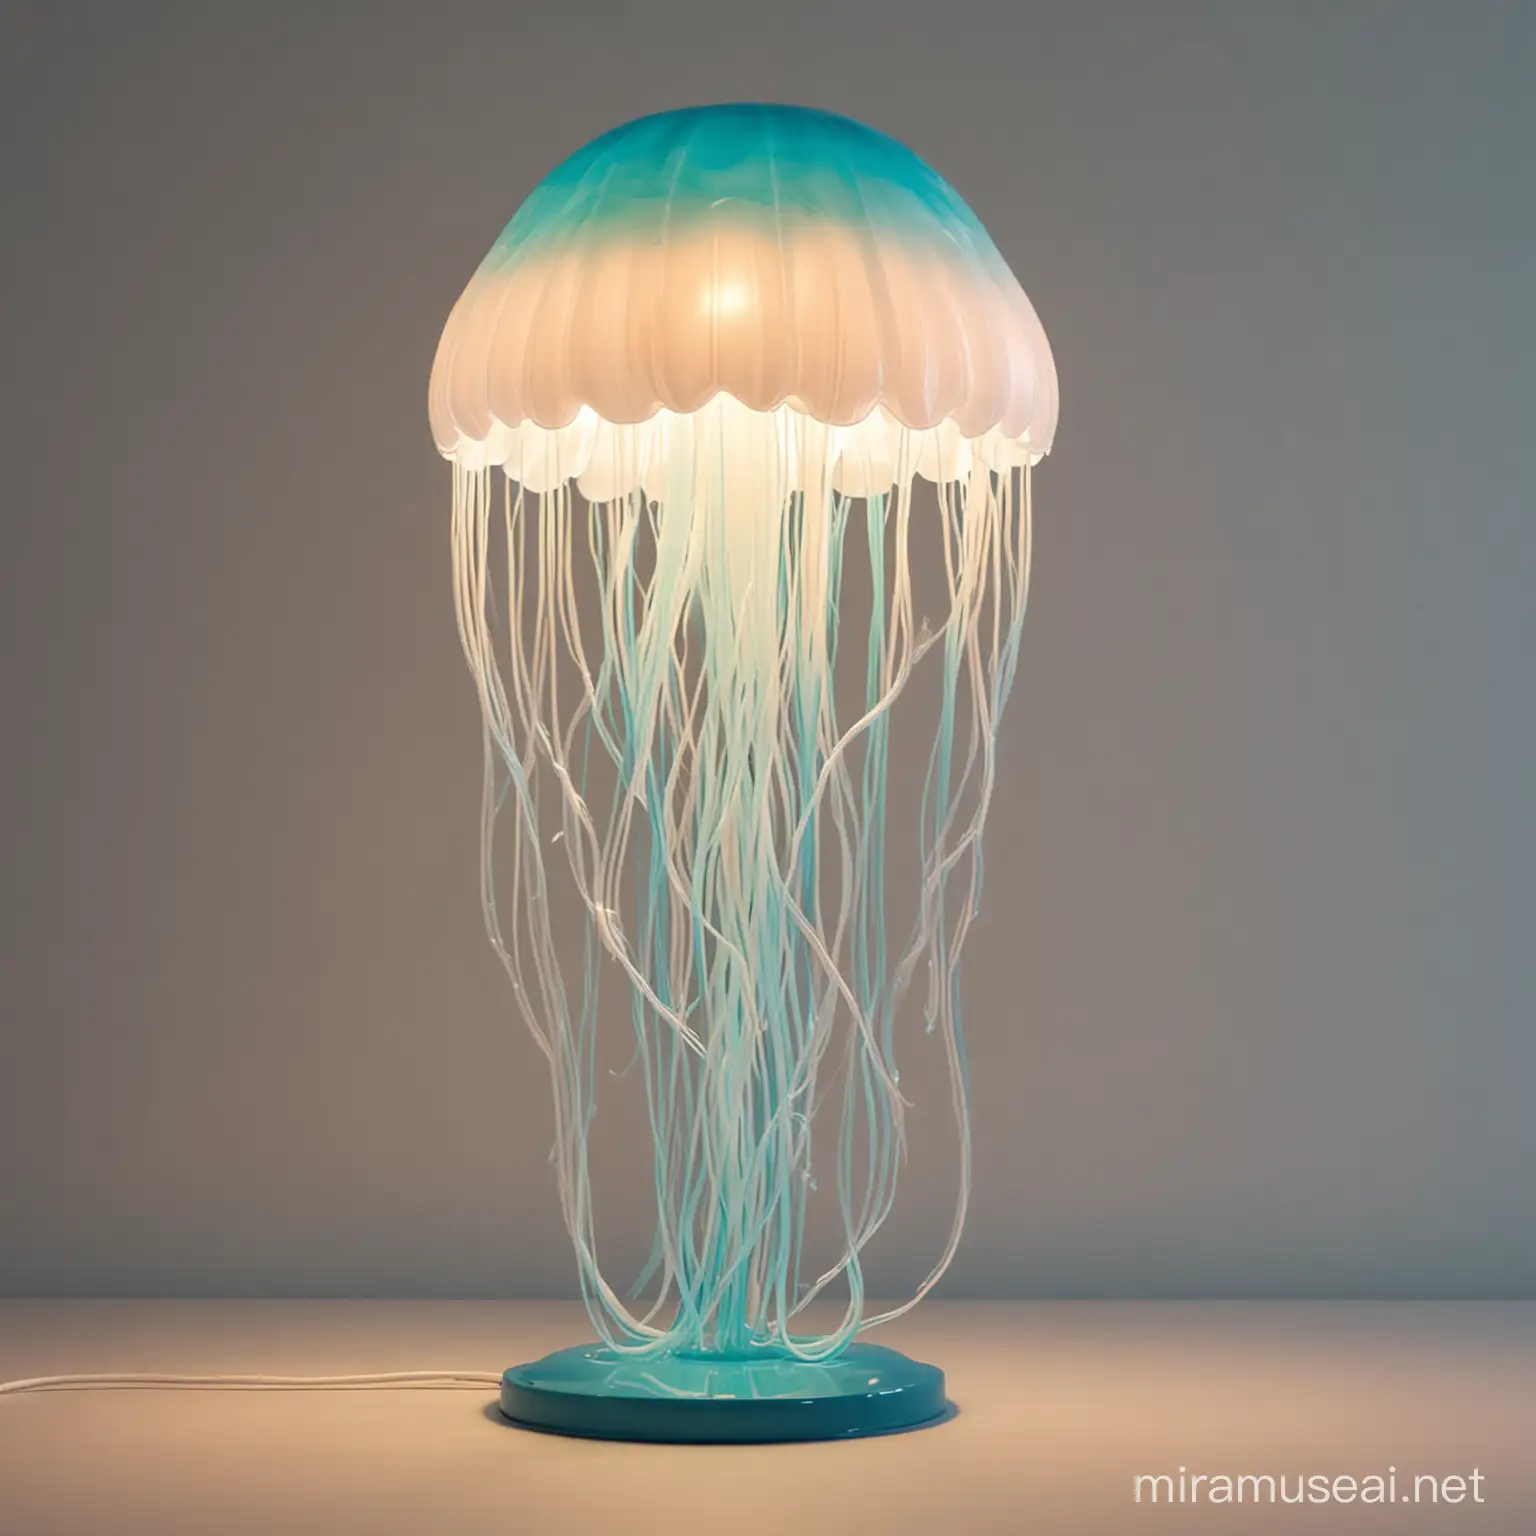 Glowing Jellyfish Inspired Lamp for Ambient Lighting